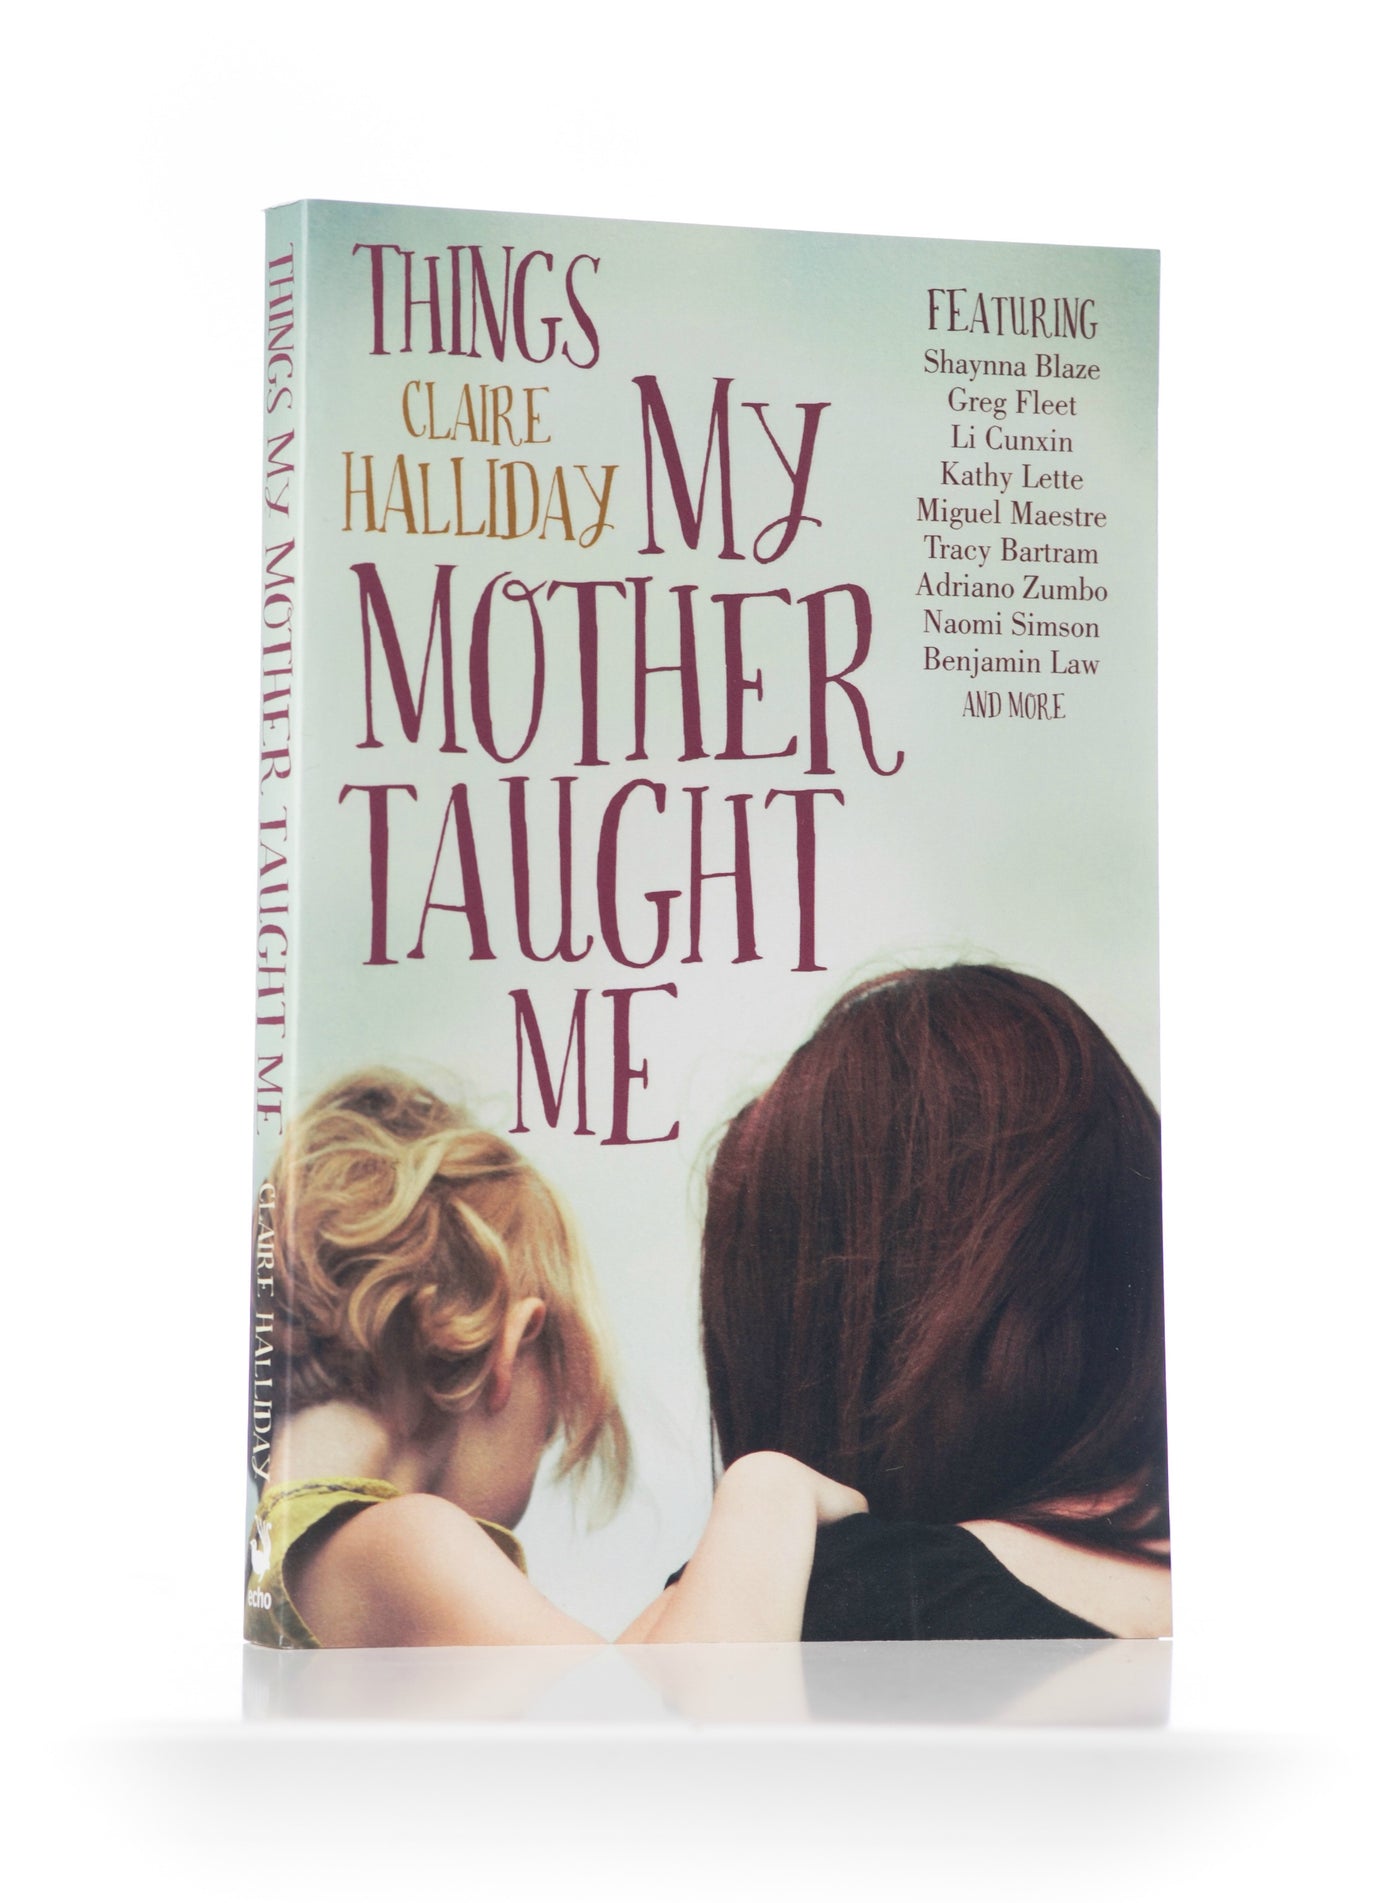 Things My Mother Taught Me by Claire Halliday